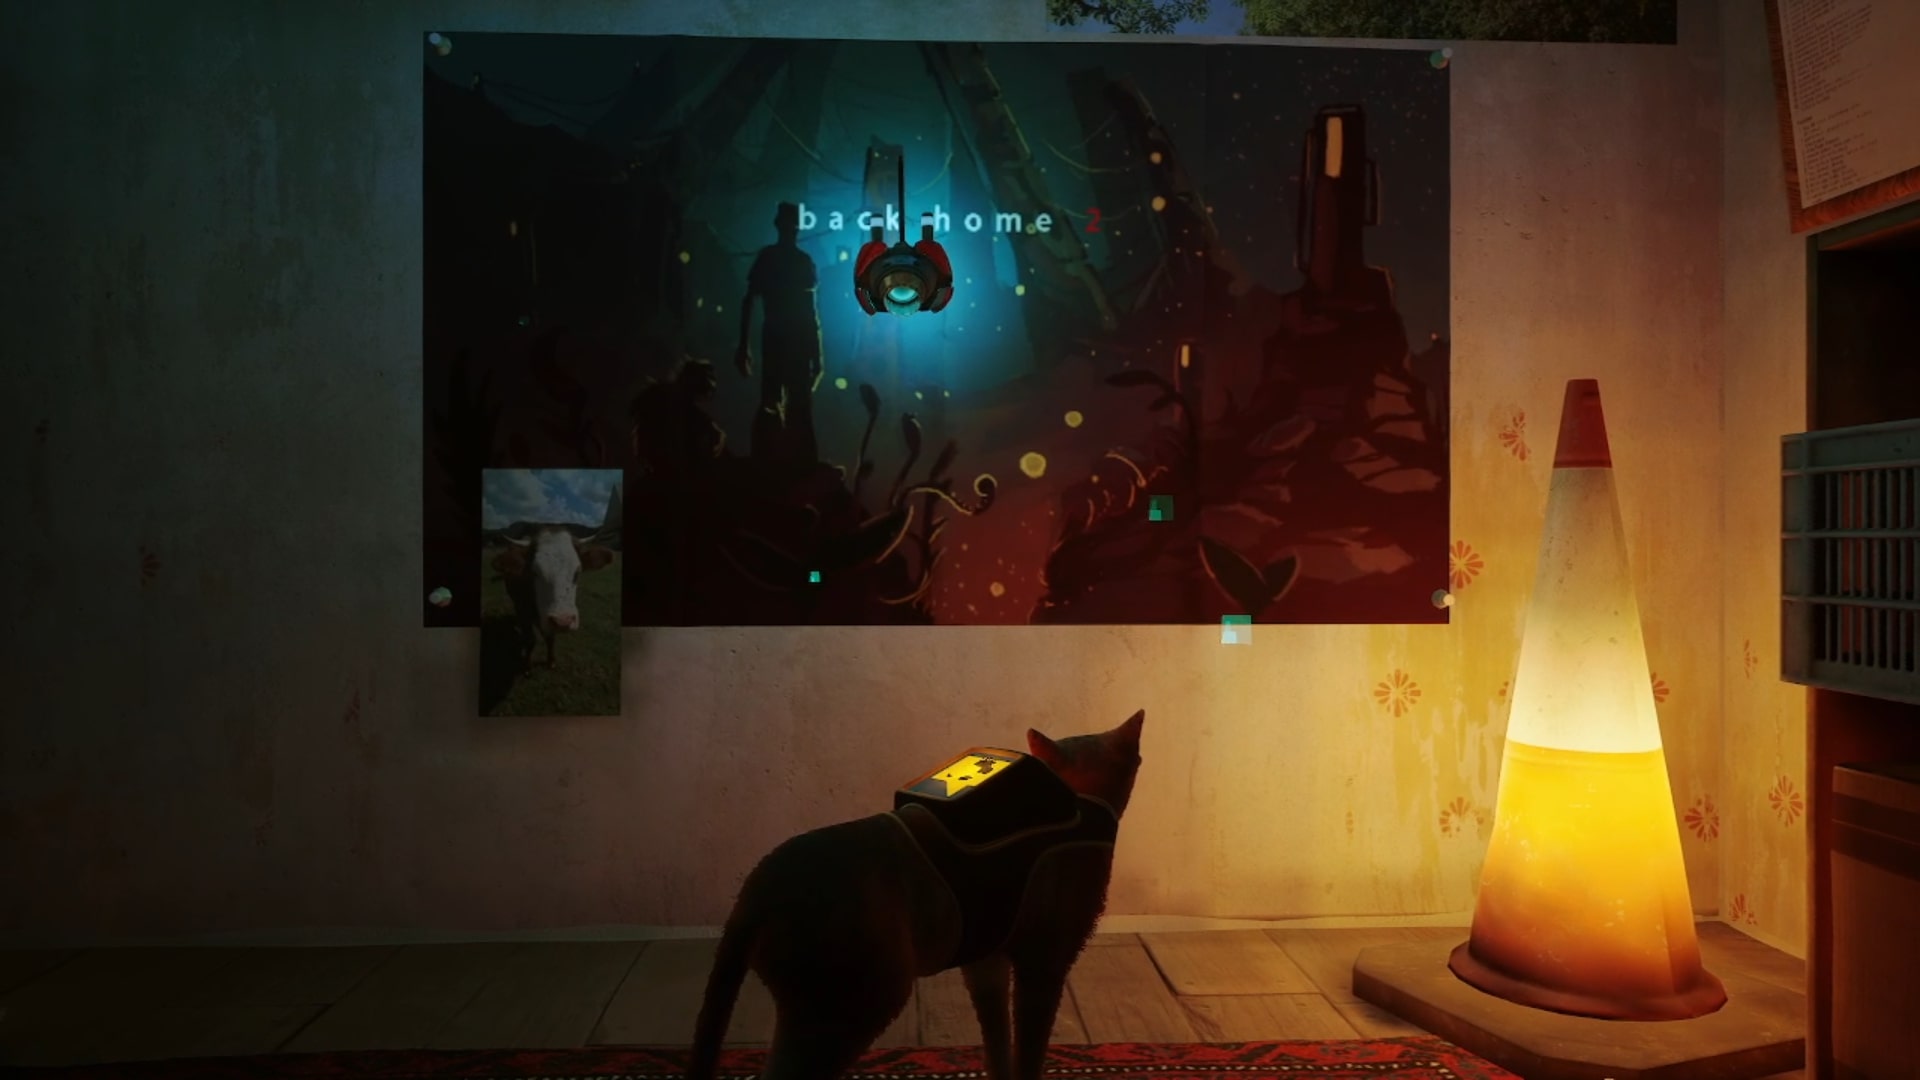 Stray memories guide: The orange tabby standing in front of the Back Home 2 poster which depicts a human standing in front of a strange alien structure